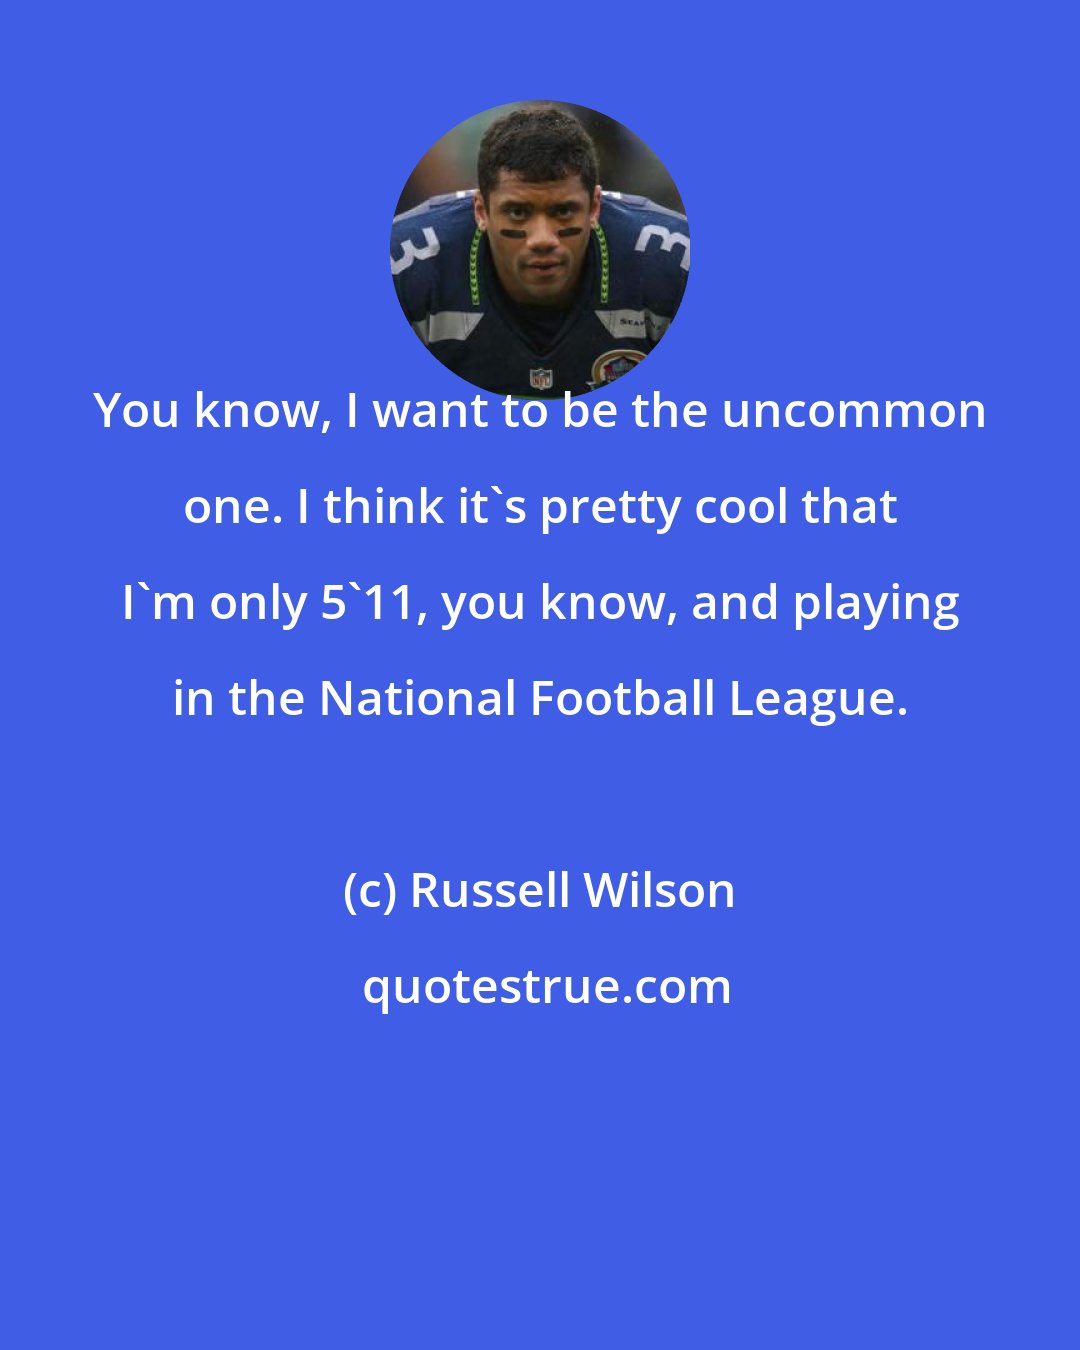 Russell Wilson: You know, I want to be the uncommon one. I think it's pretty cool that I'm only 5'11, you know, and playing in the National Football League.